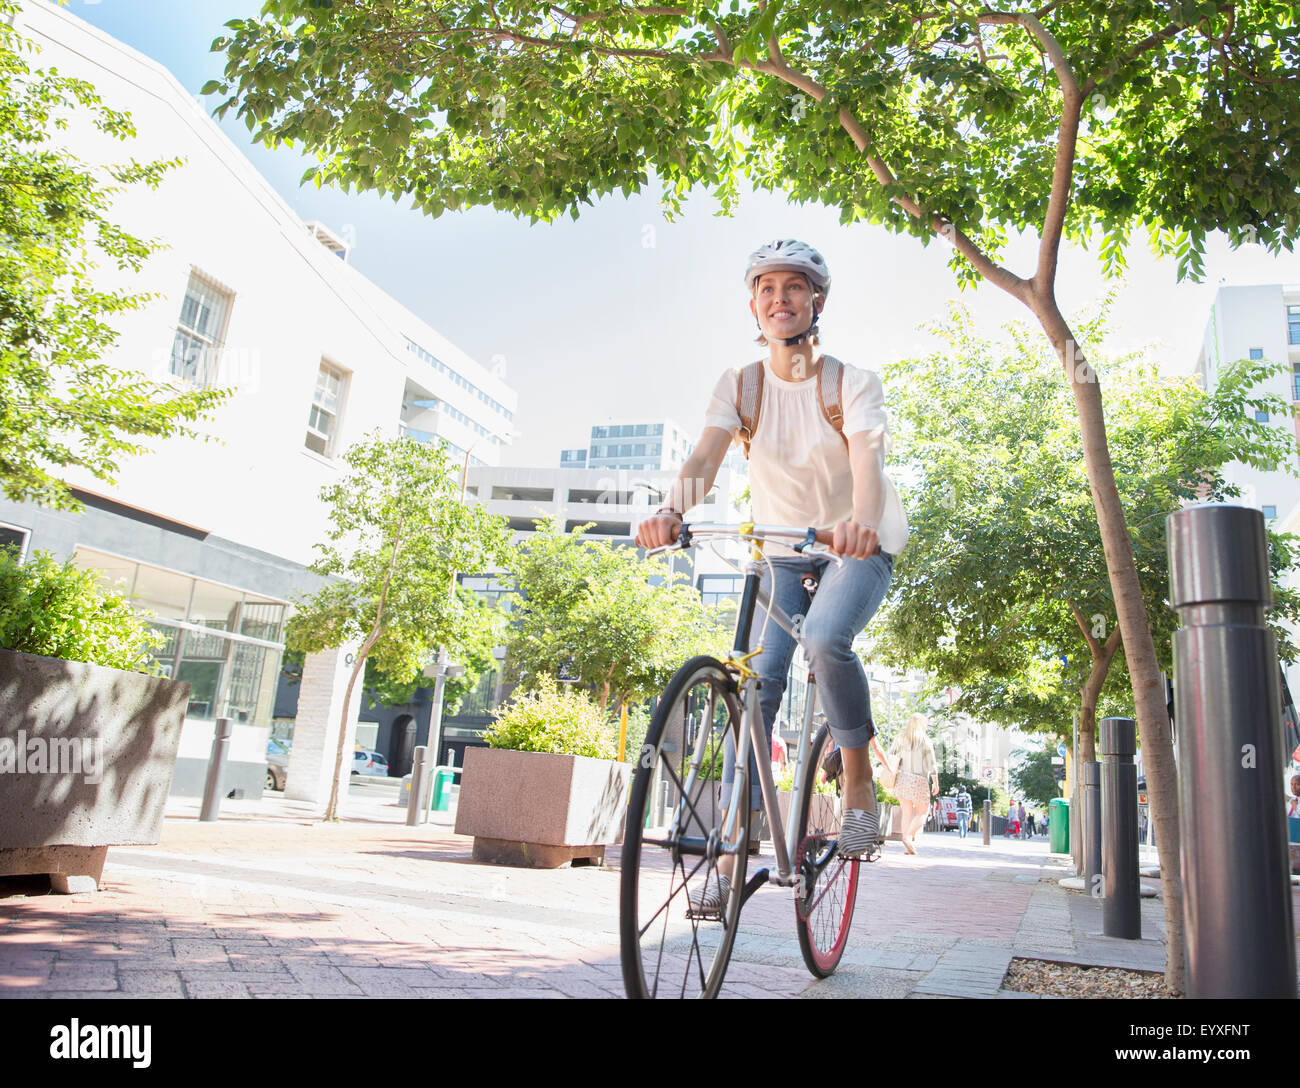 Smiling young woman with helmet riding bicycle in urban park Stock Photo